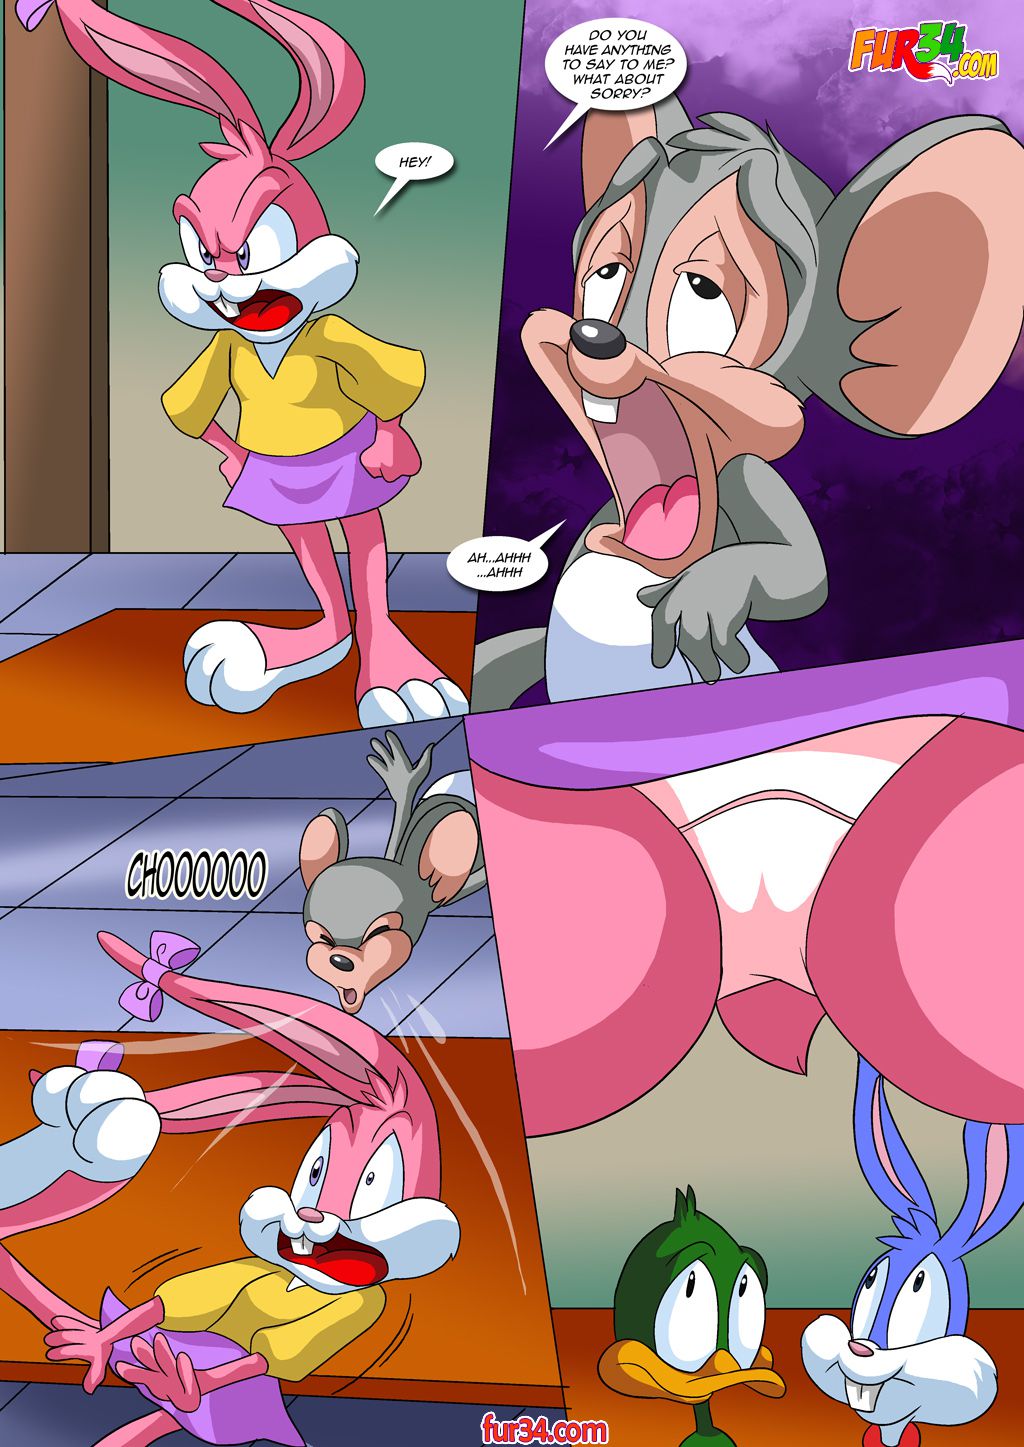 [Palcomix] Stripper Babs (Tiny Toons) [Ongoing] 4